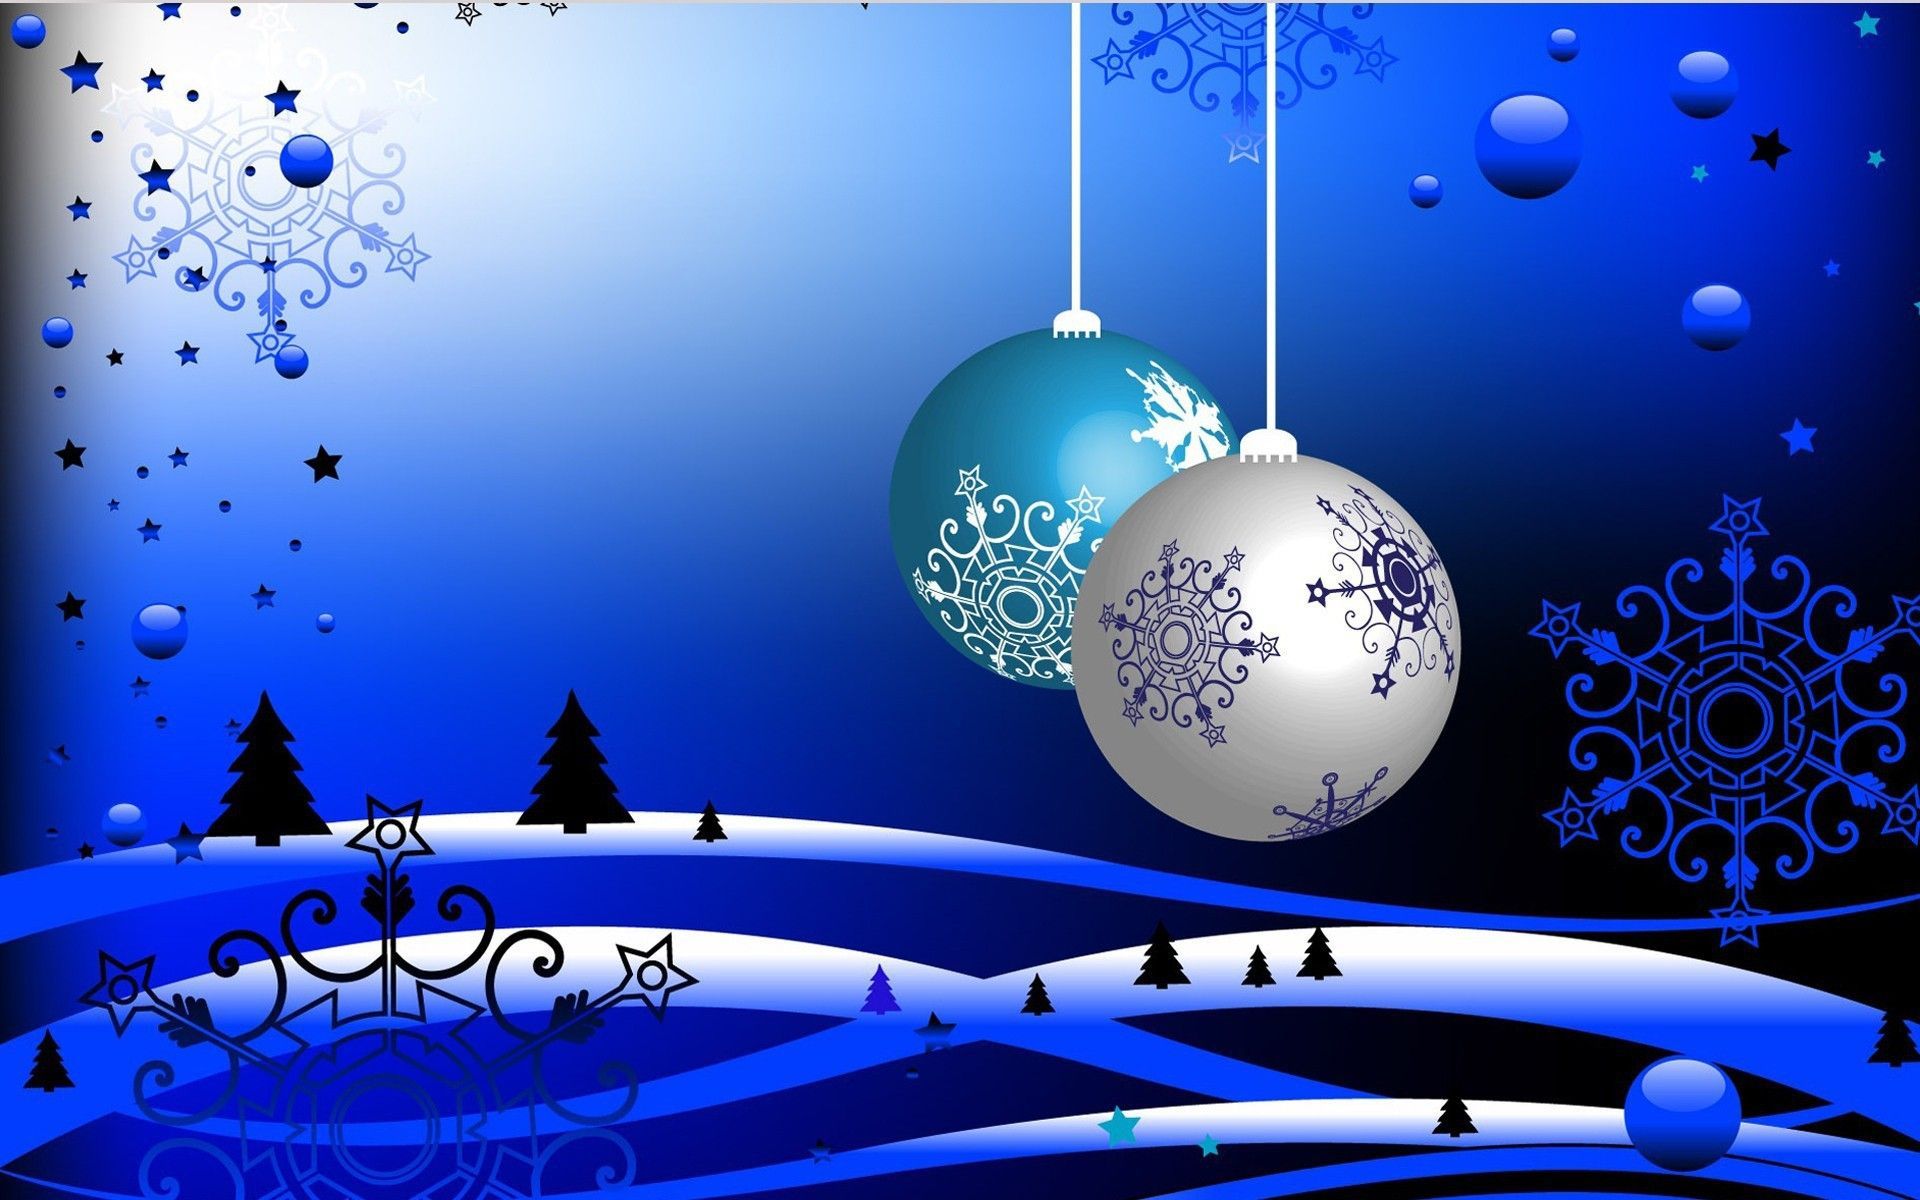 White christmas in blue colors wallpaper. Christmas wallpaper hd, Christmas desktop, Holiday wallpaper